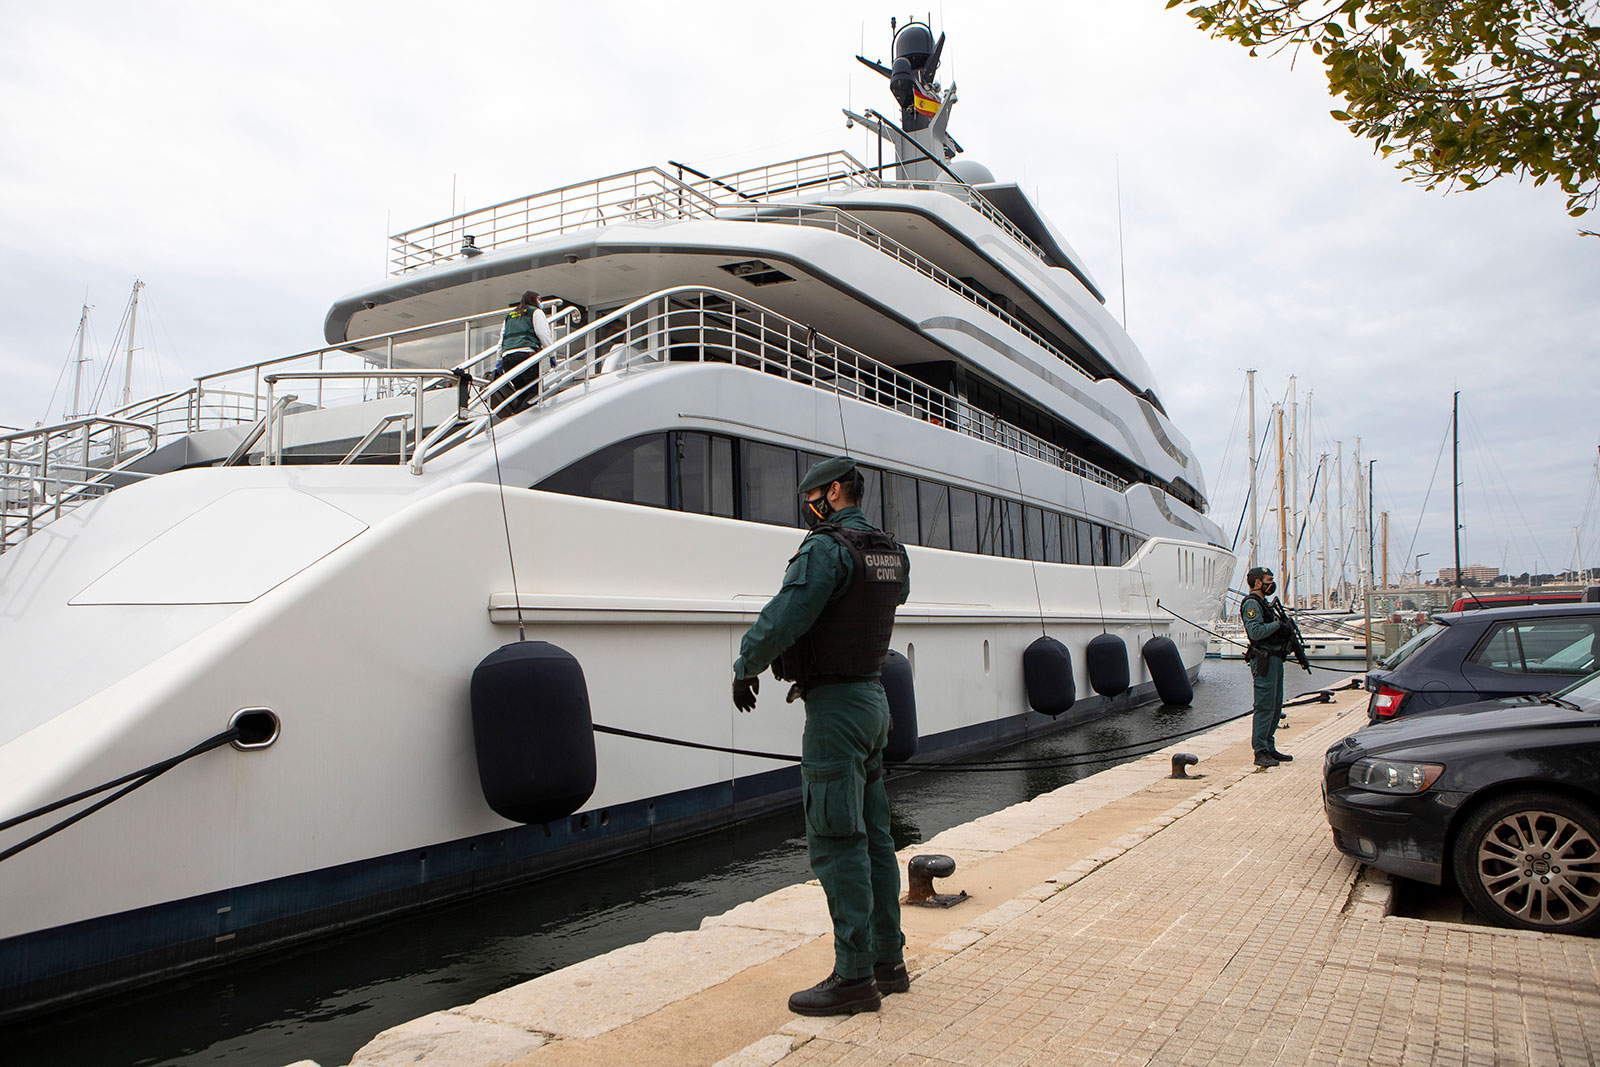 Civil Guards stand by the yacht called Tango in Palma de Mallorca, Spain, on April 4, 2022.